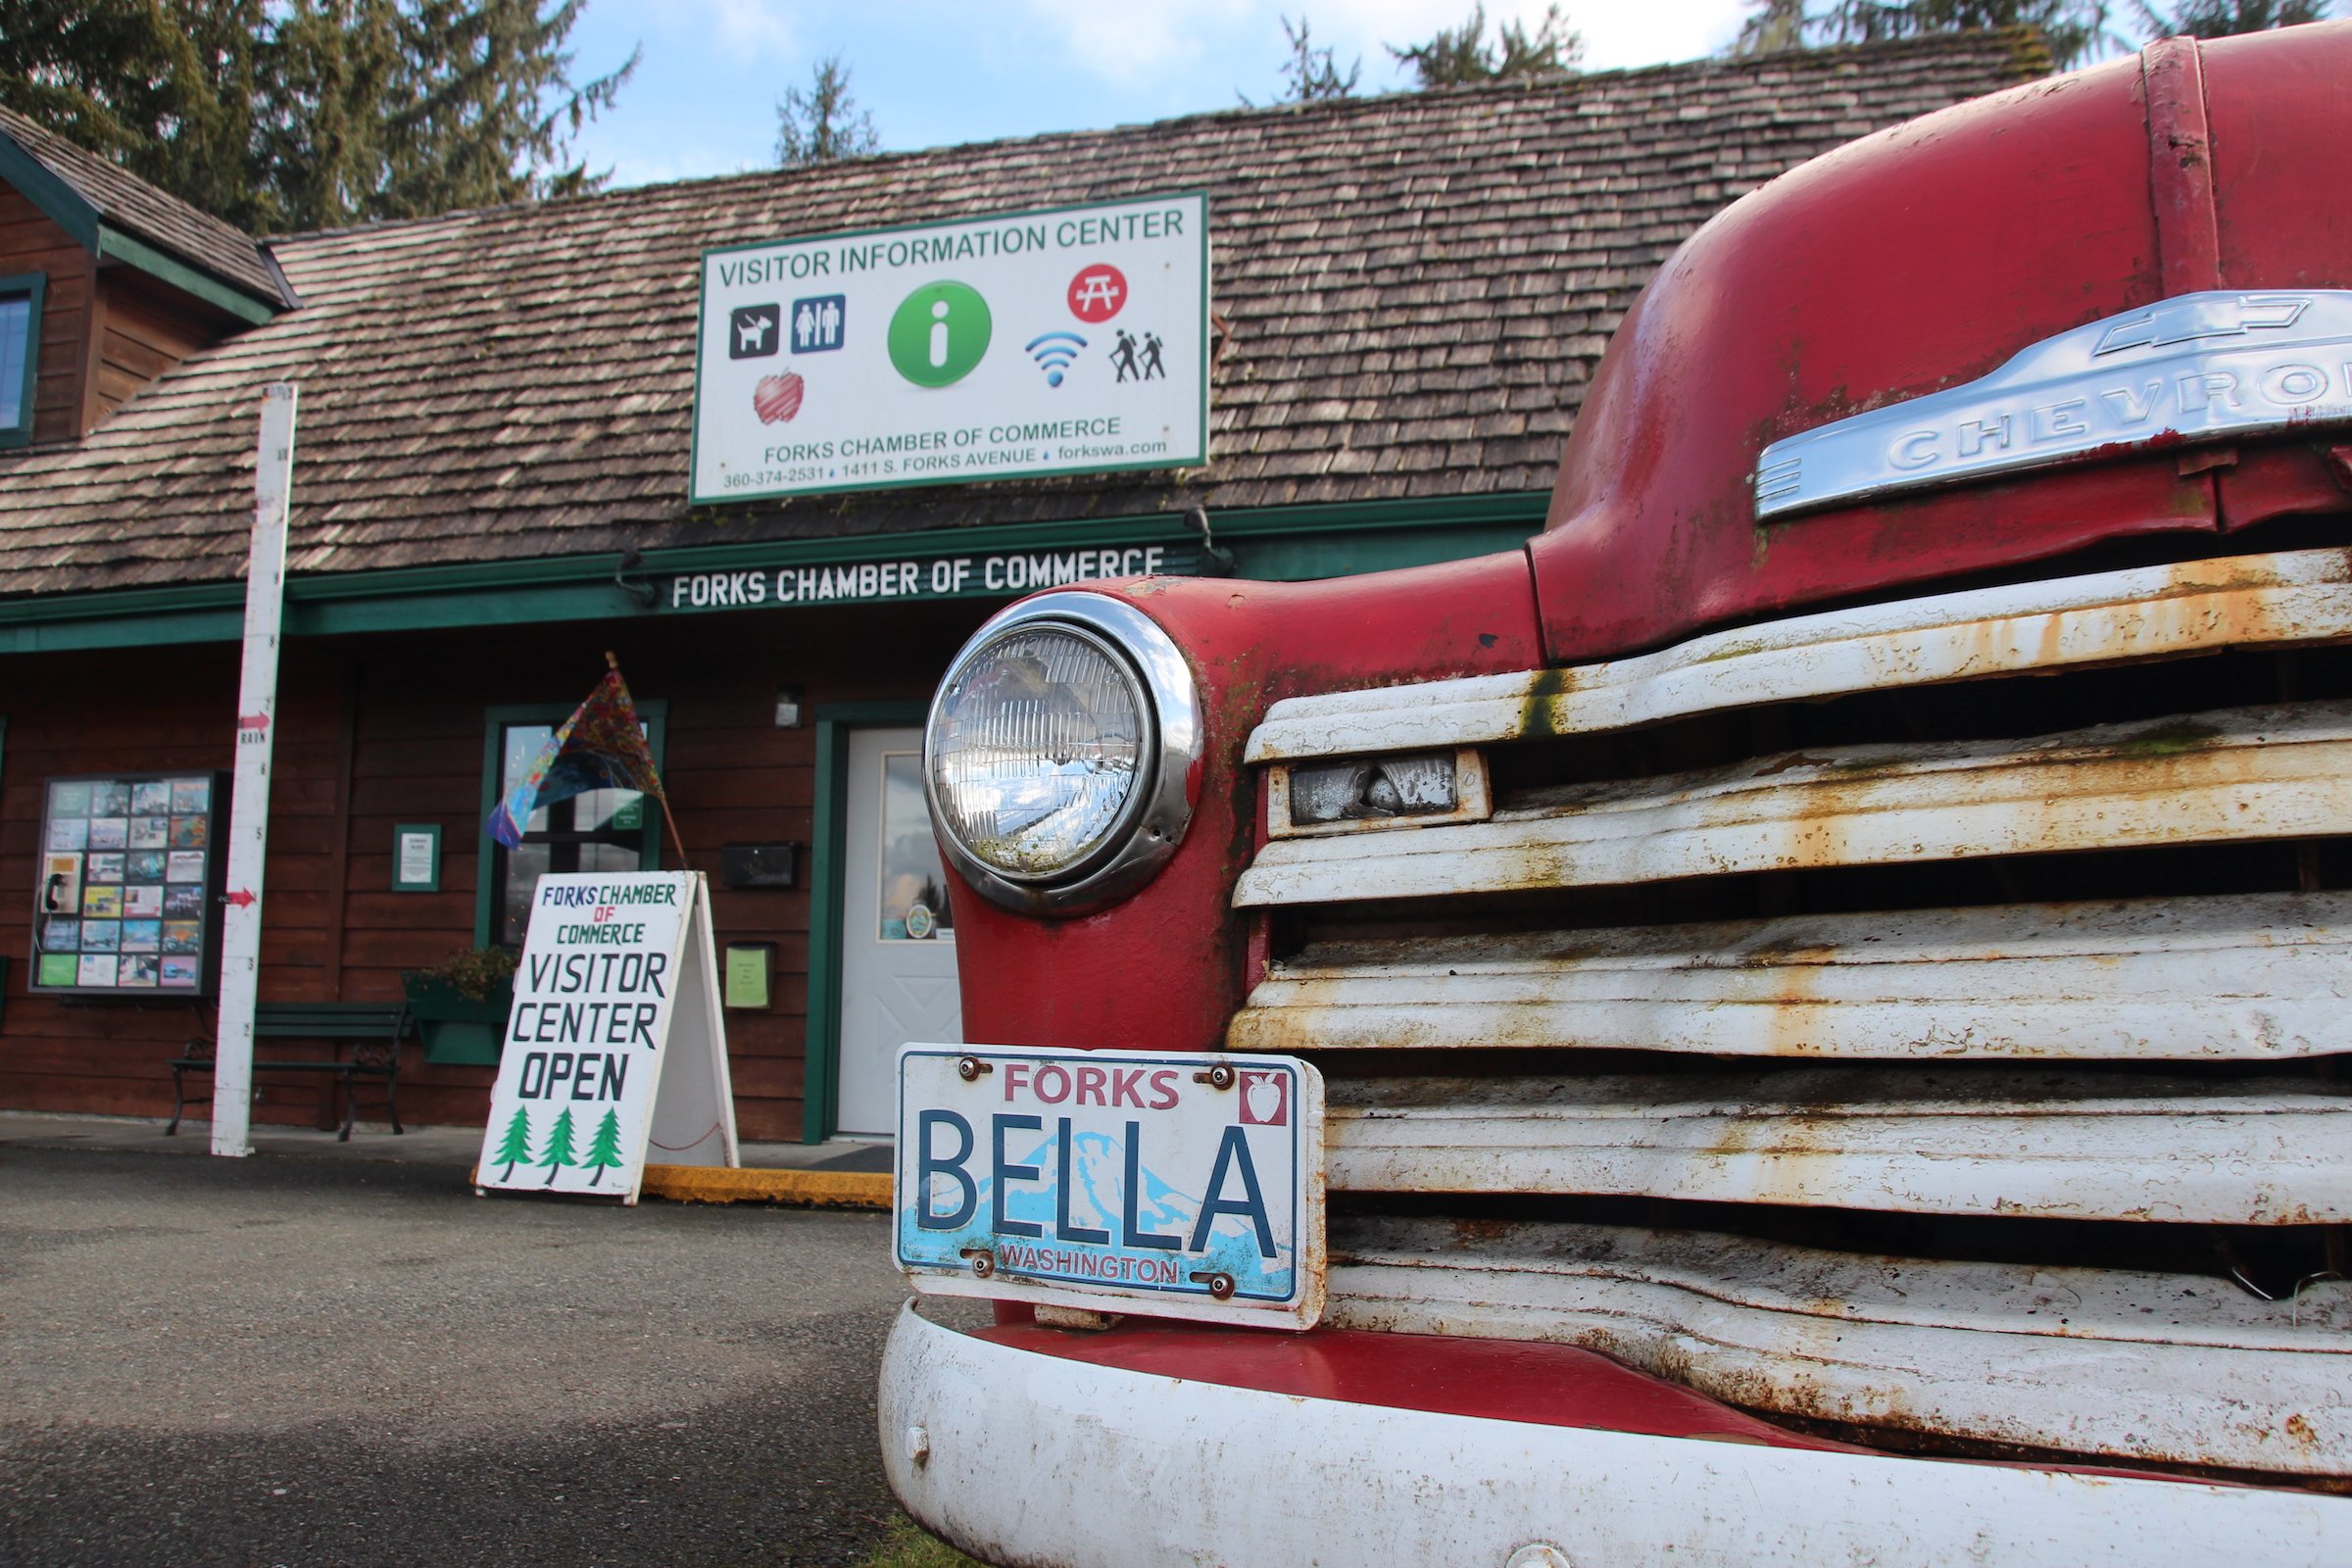 An old Chevrolet is parked in front of the visitor centre in the small town of Forks